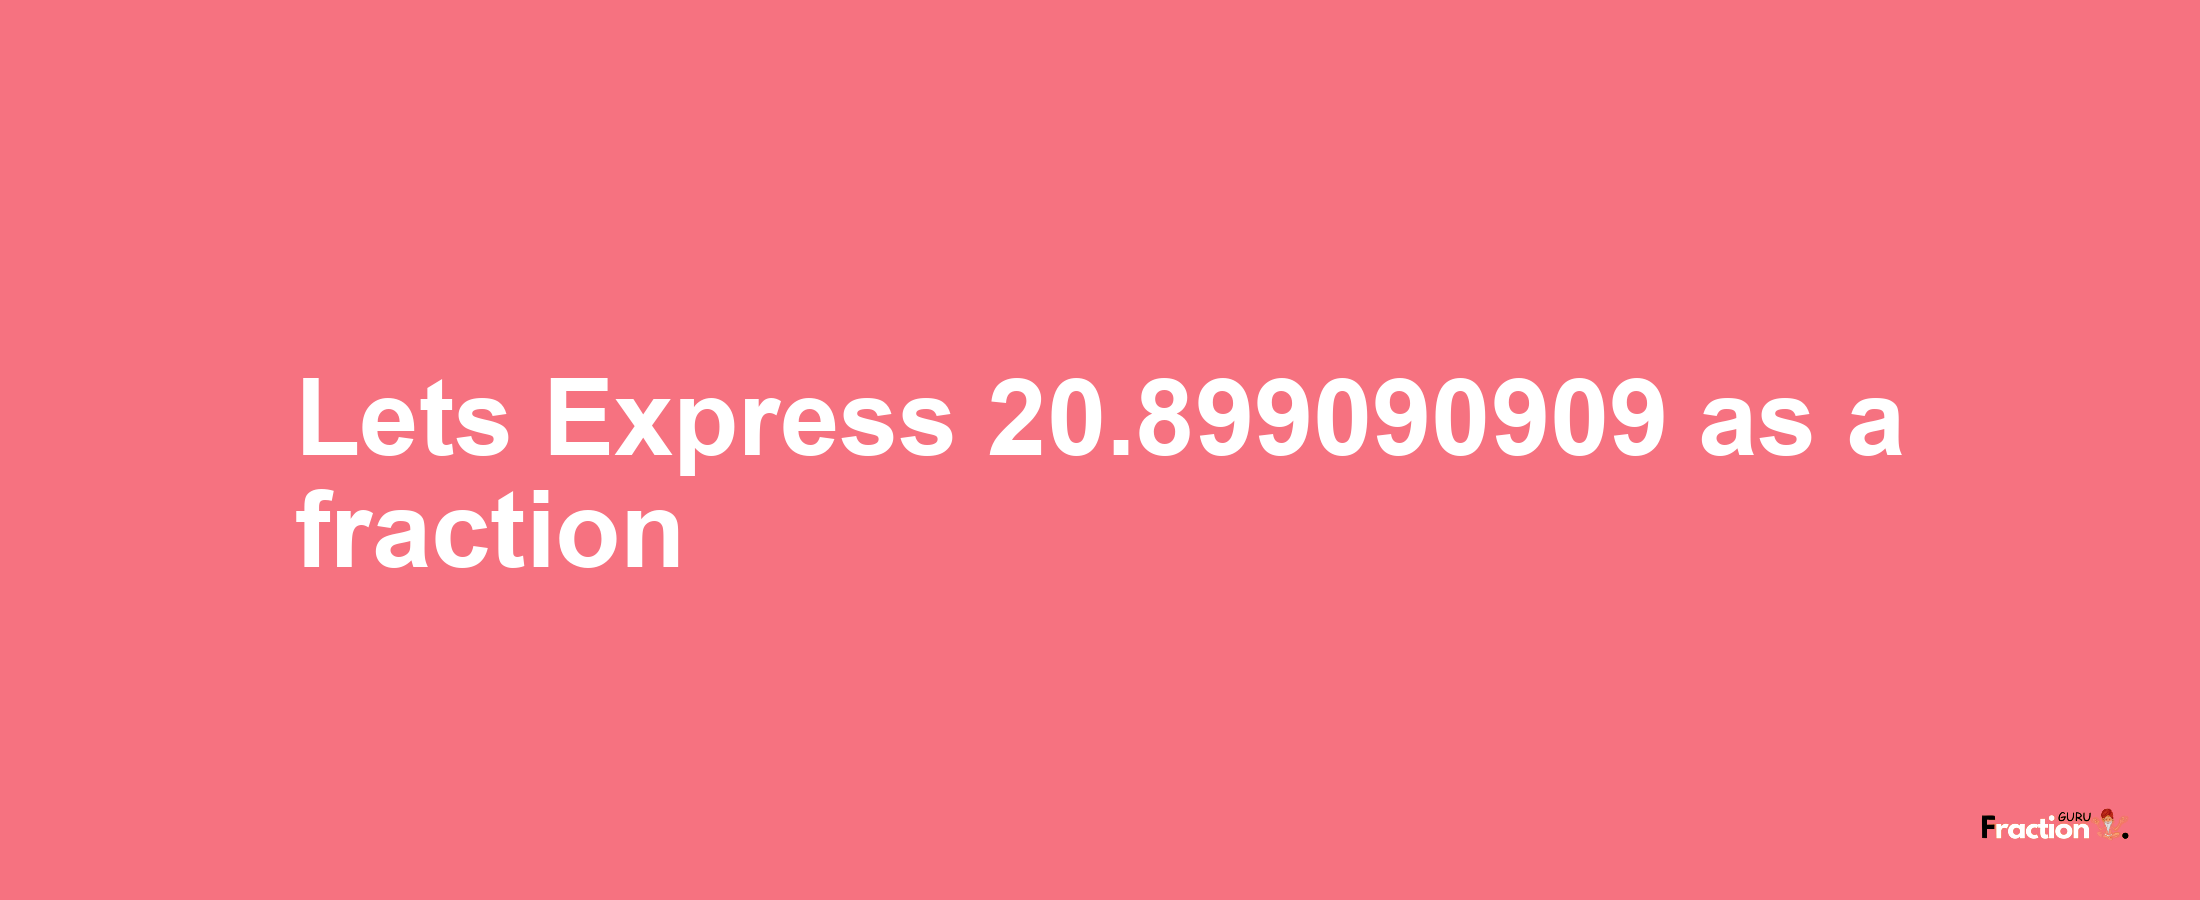 Lets Express 20.899090909 as afraction